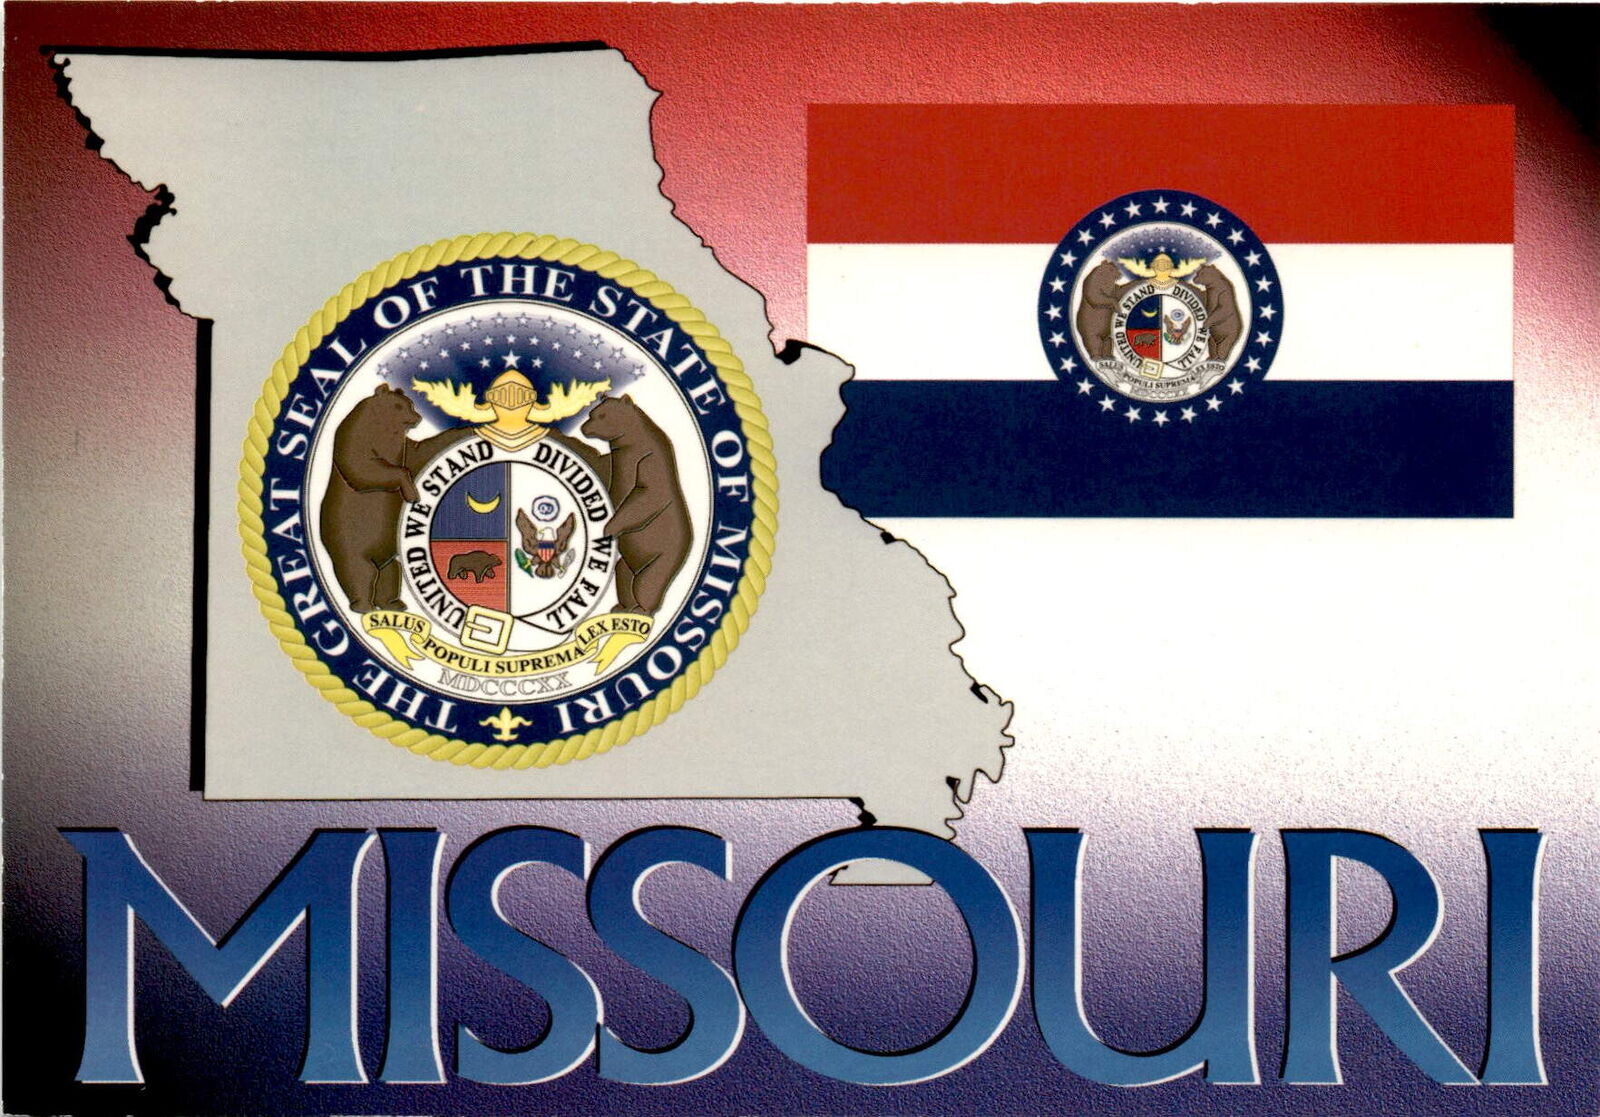 The postcard features the Missouri seal with bears, eagle, and state motto.